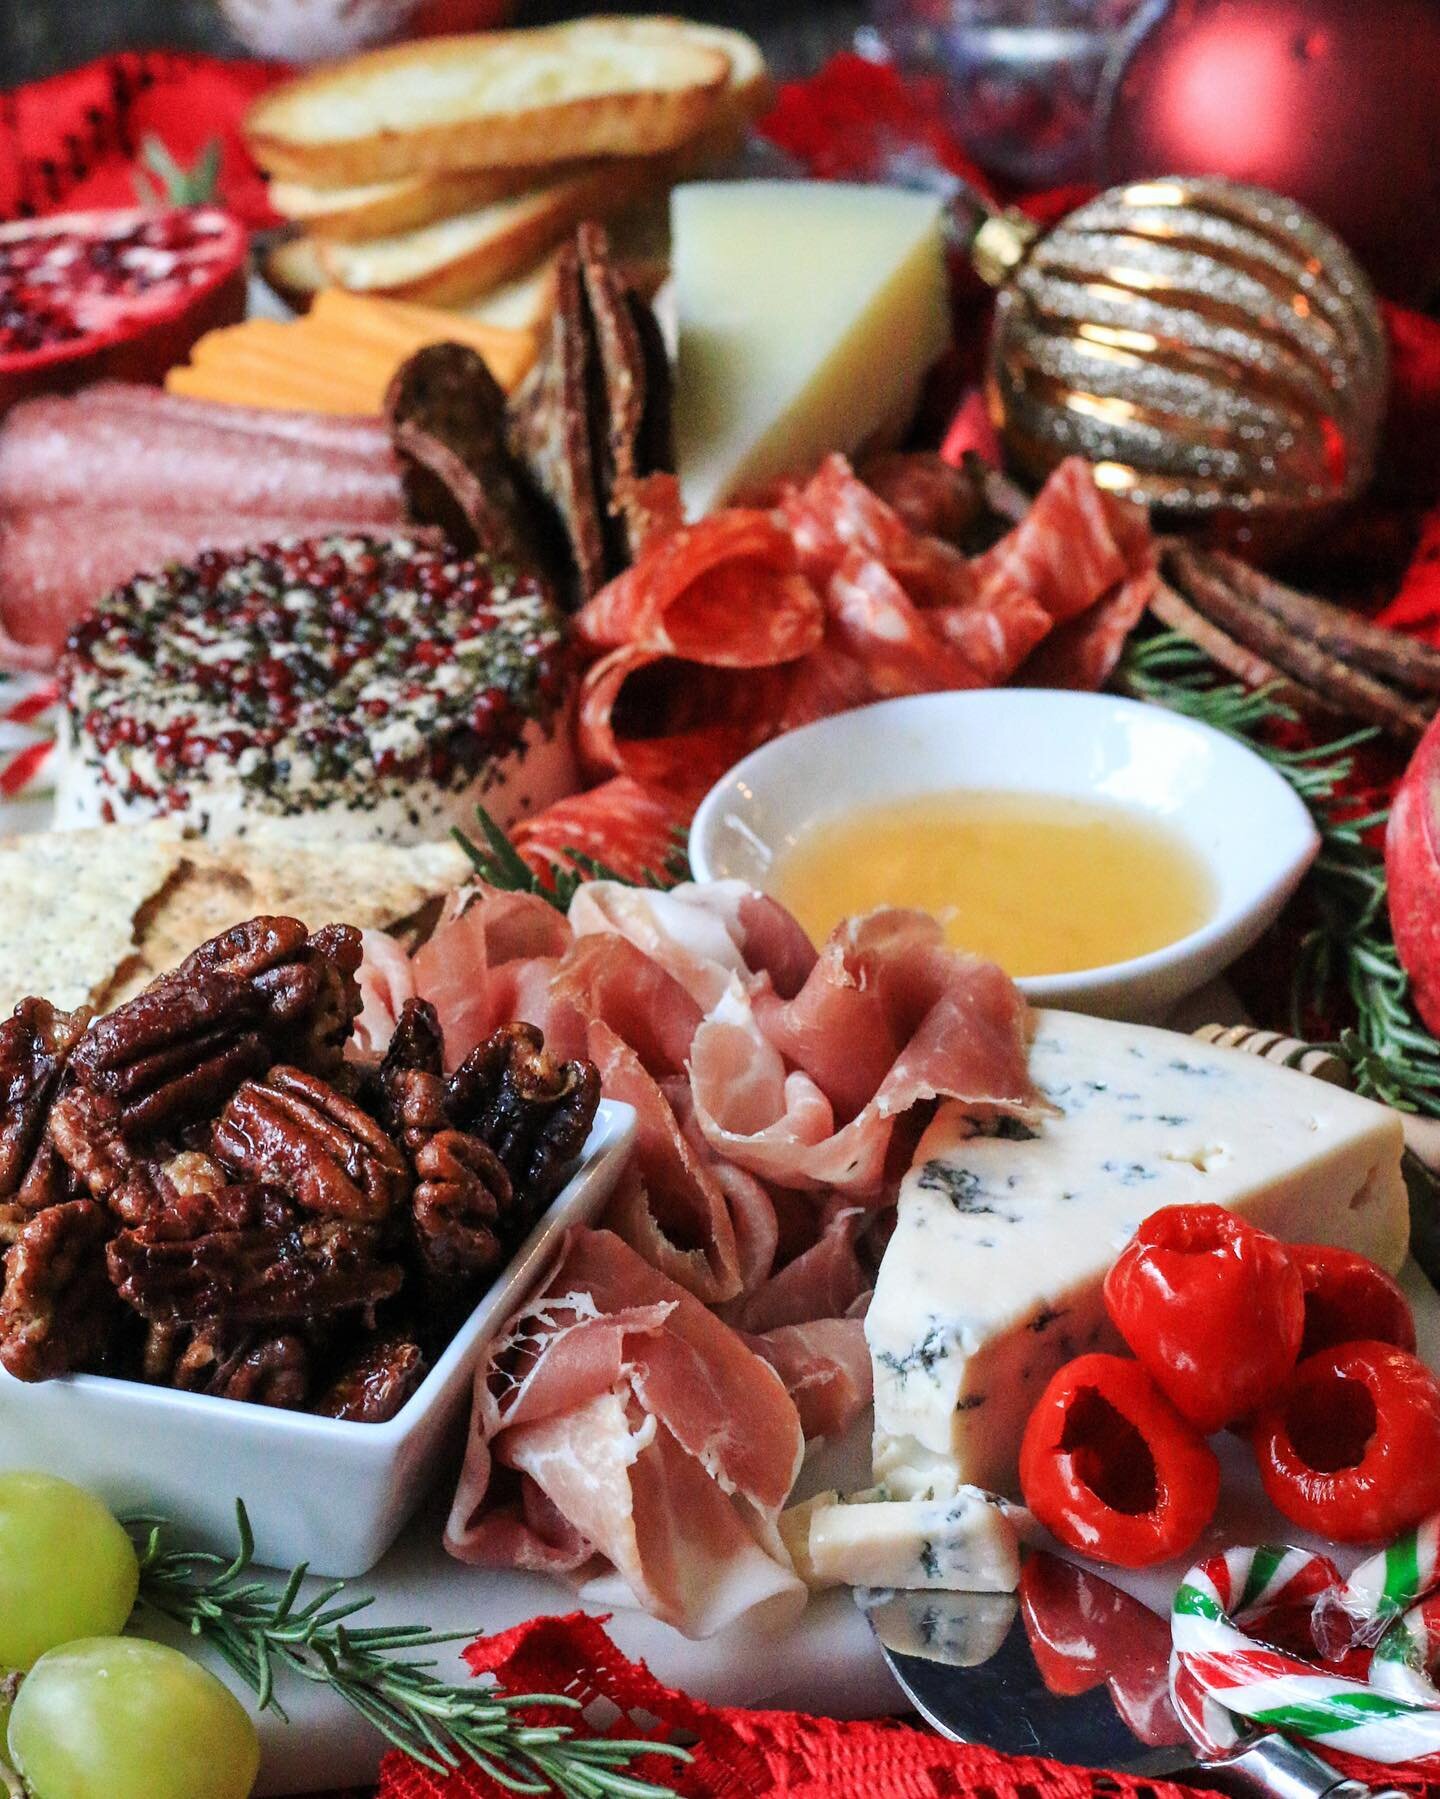 Looking for some holiday snack inspiration? Check out my latest blog post for some tips and tricks on how to spruce up a deli platter for the holidays! From seasonal ingredients to festive garnishes, there are a lot of elements to consider if you wan